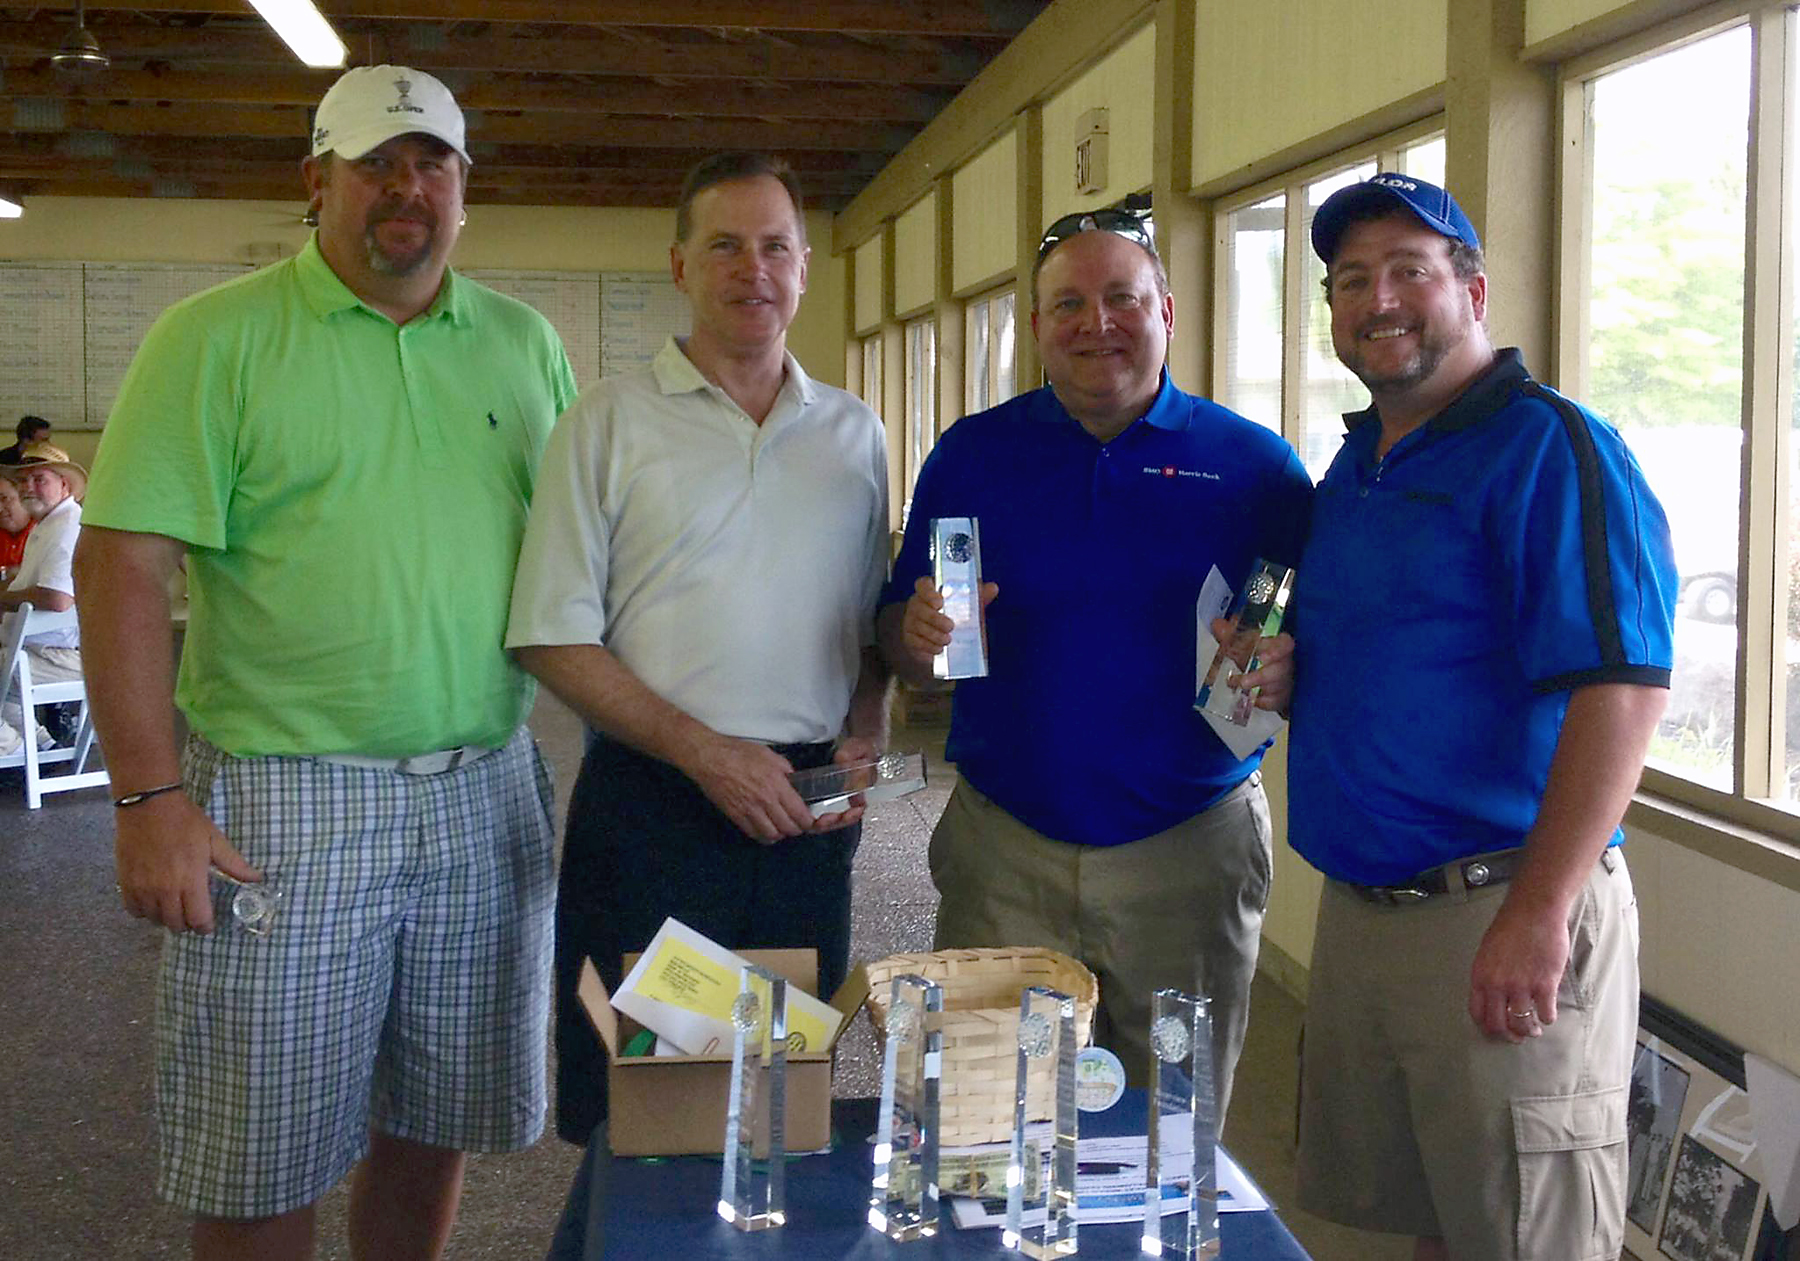 From left: Mark Bilger, John Kirkwood, Greg O’Connor and Chuck Goodrich, Riverview Hospital Foundation Board Chair. Mark Midkiff also was on the second place BMO Harris team, but not in the picture. (Submitted photo)